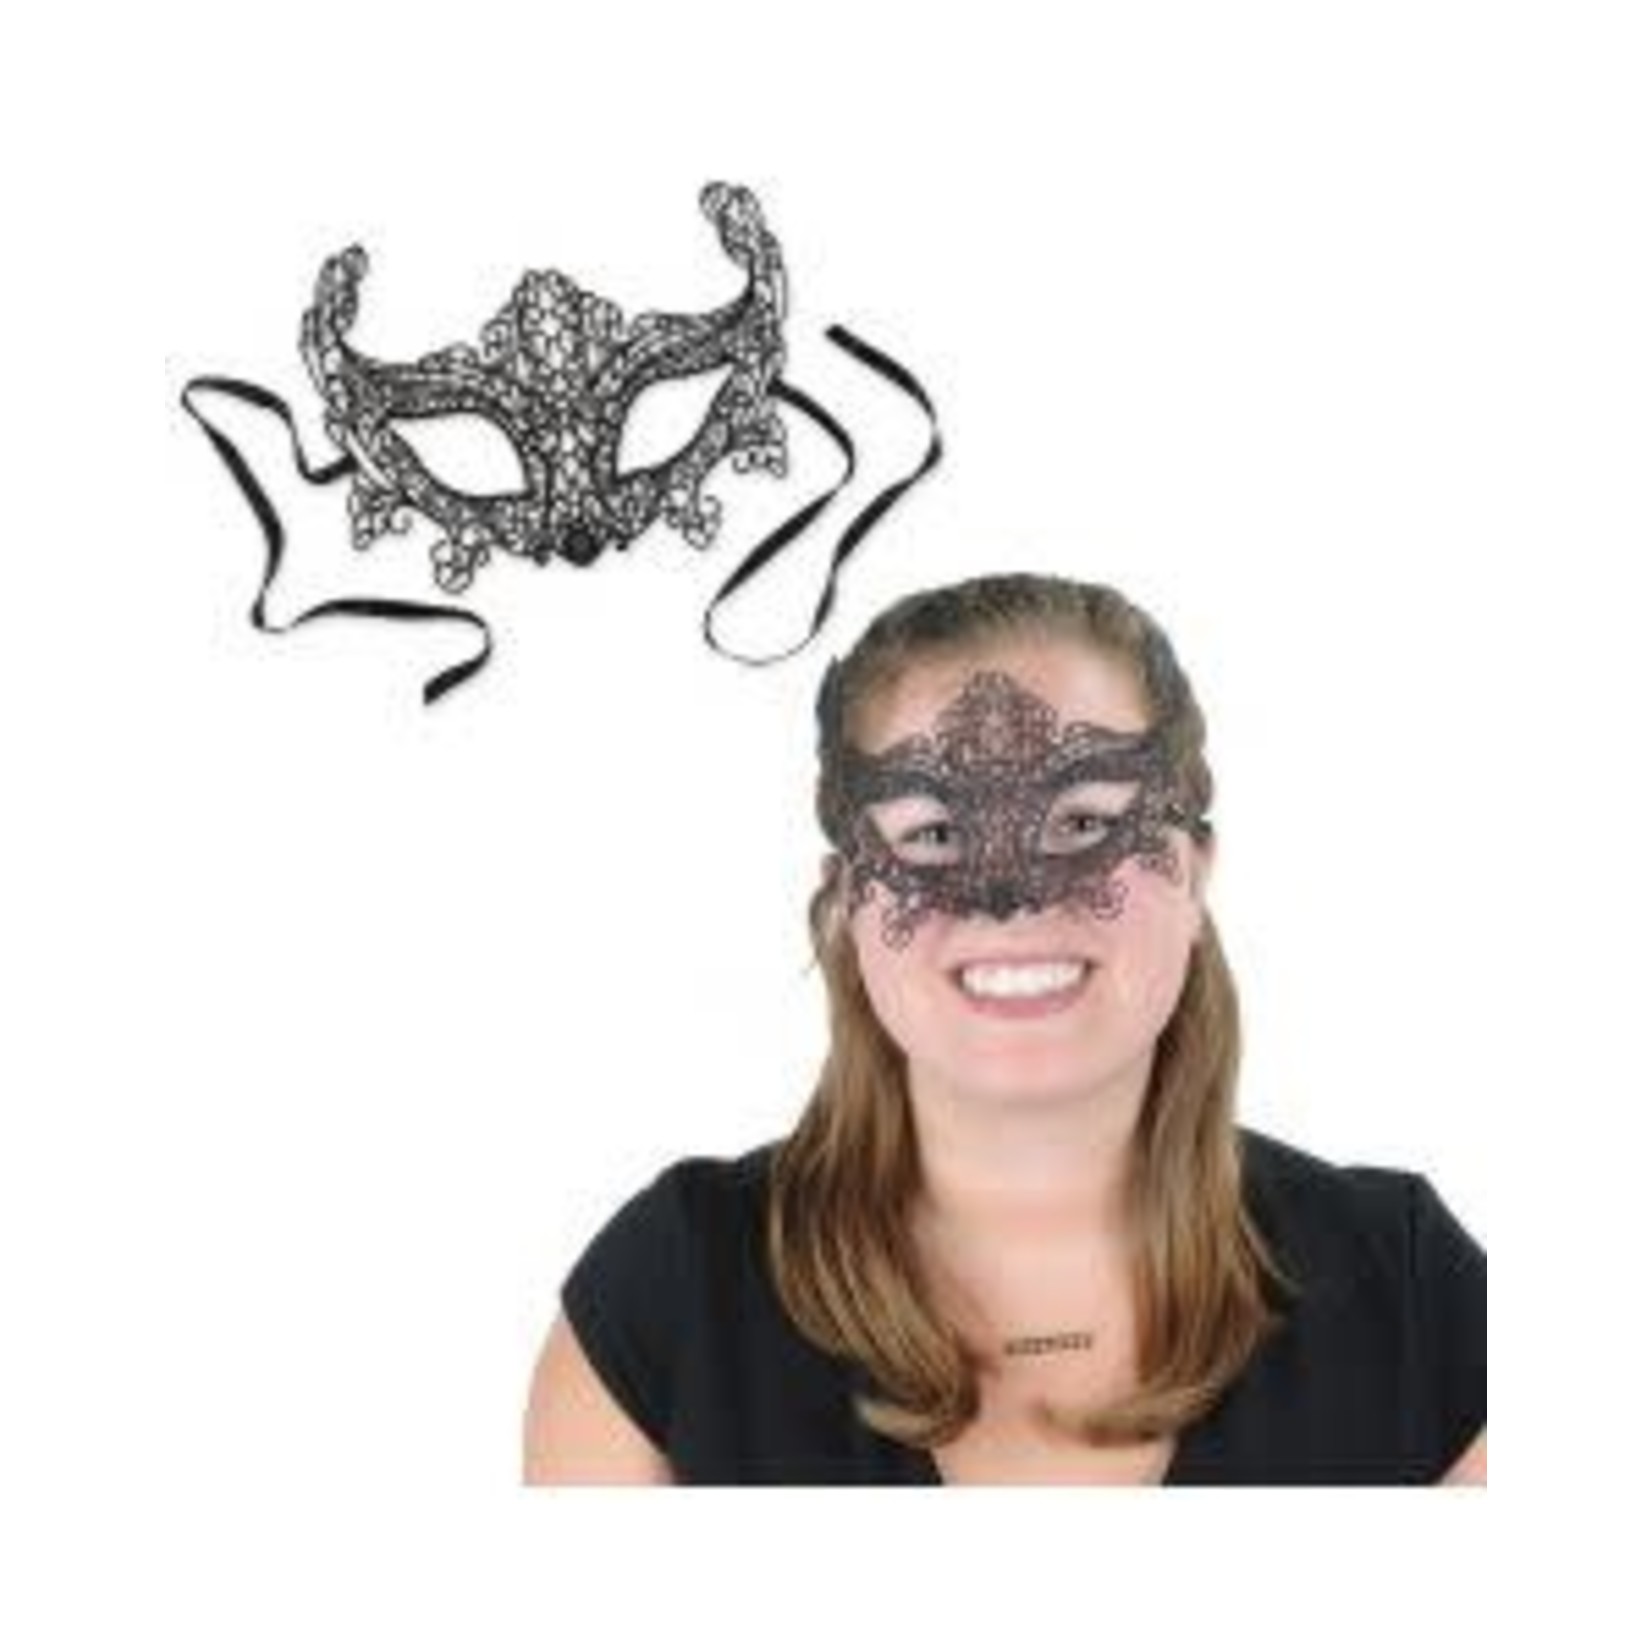 Beistle Masquerade Black Lace Mask - 1ct.